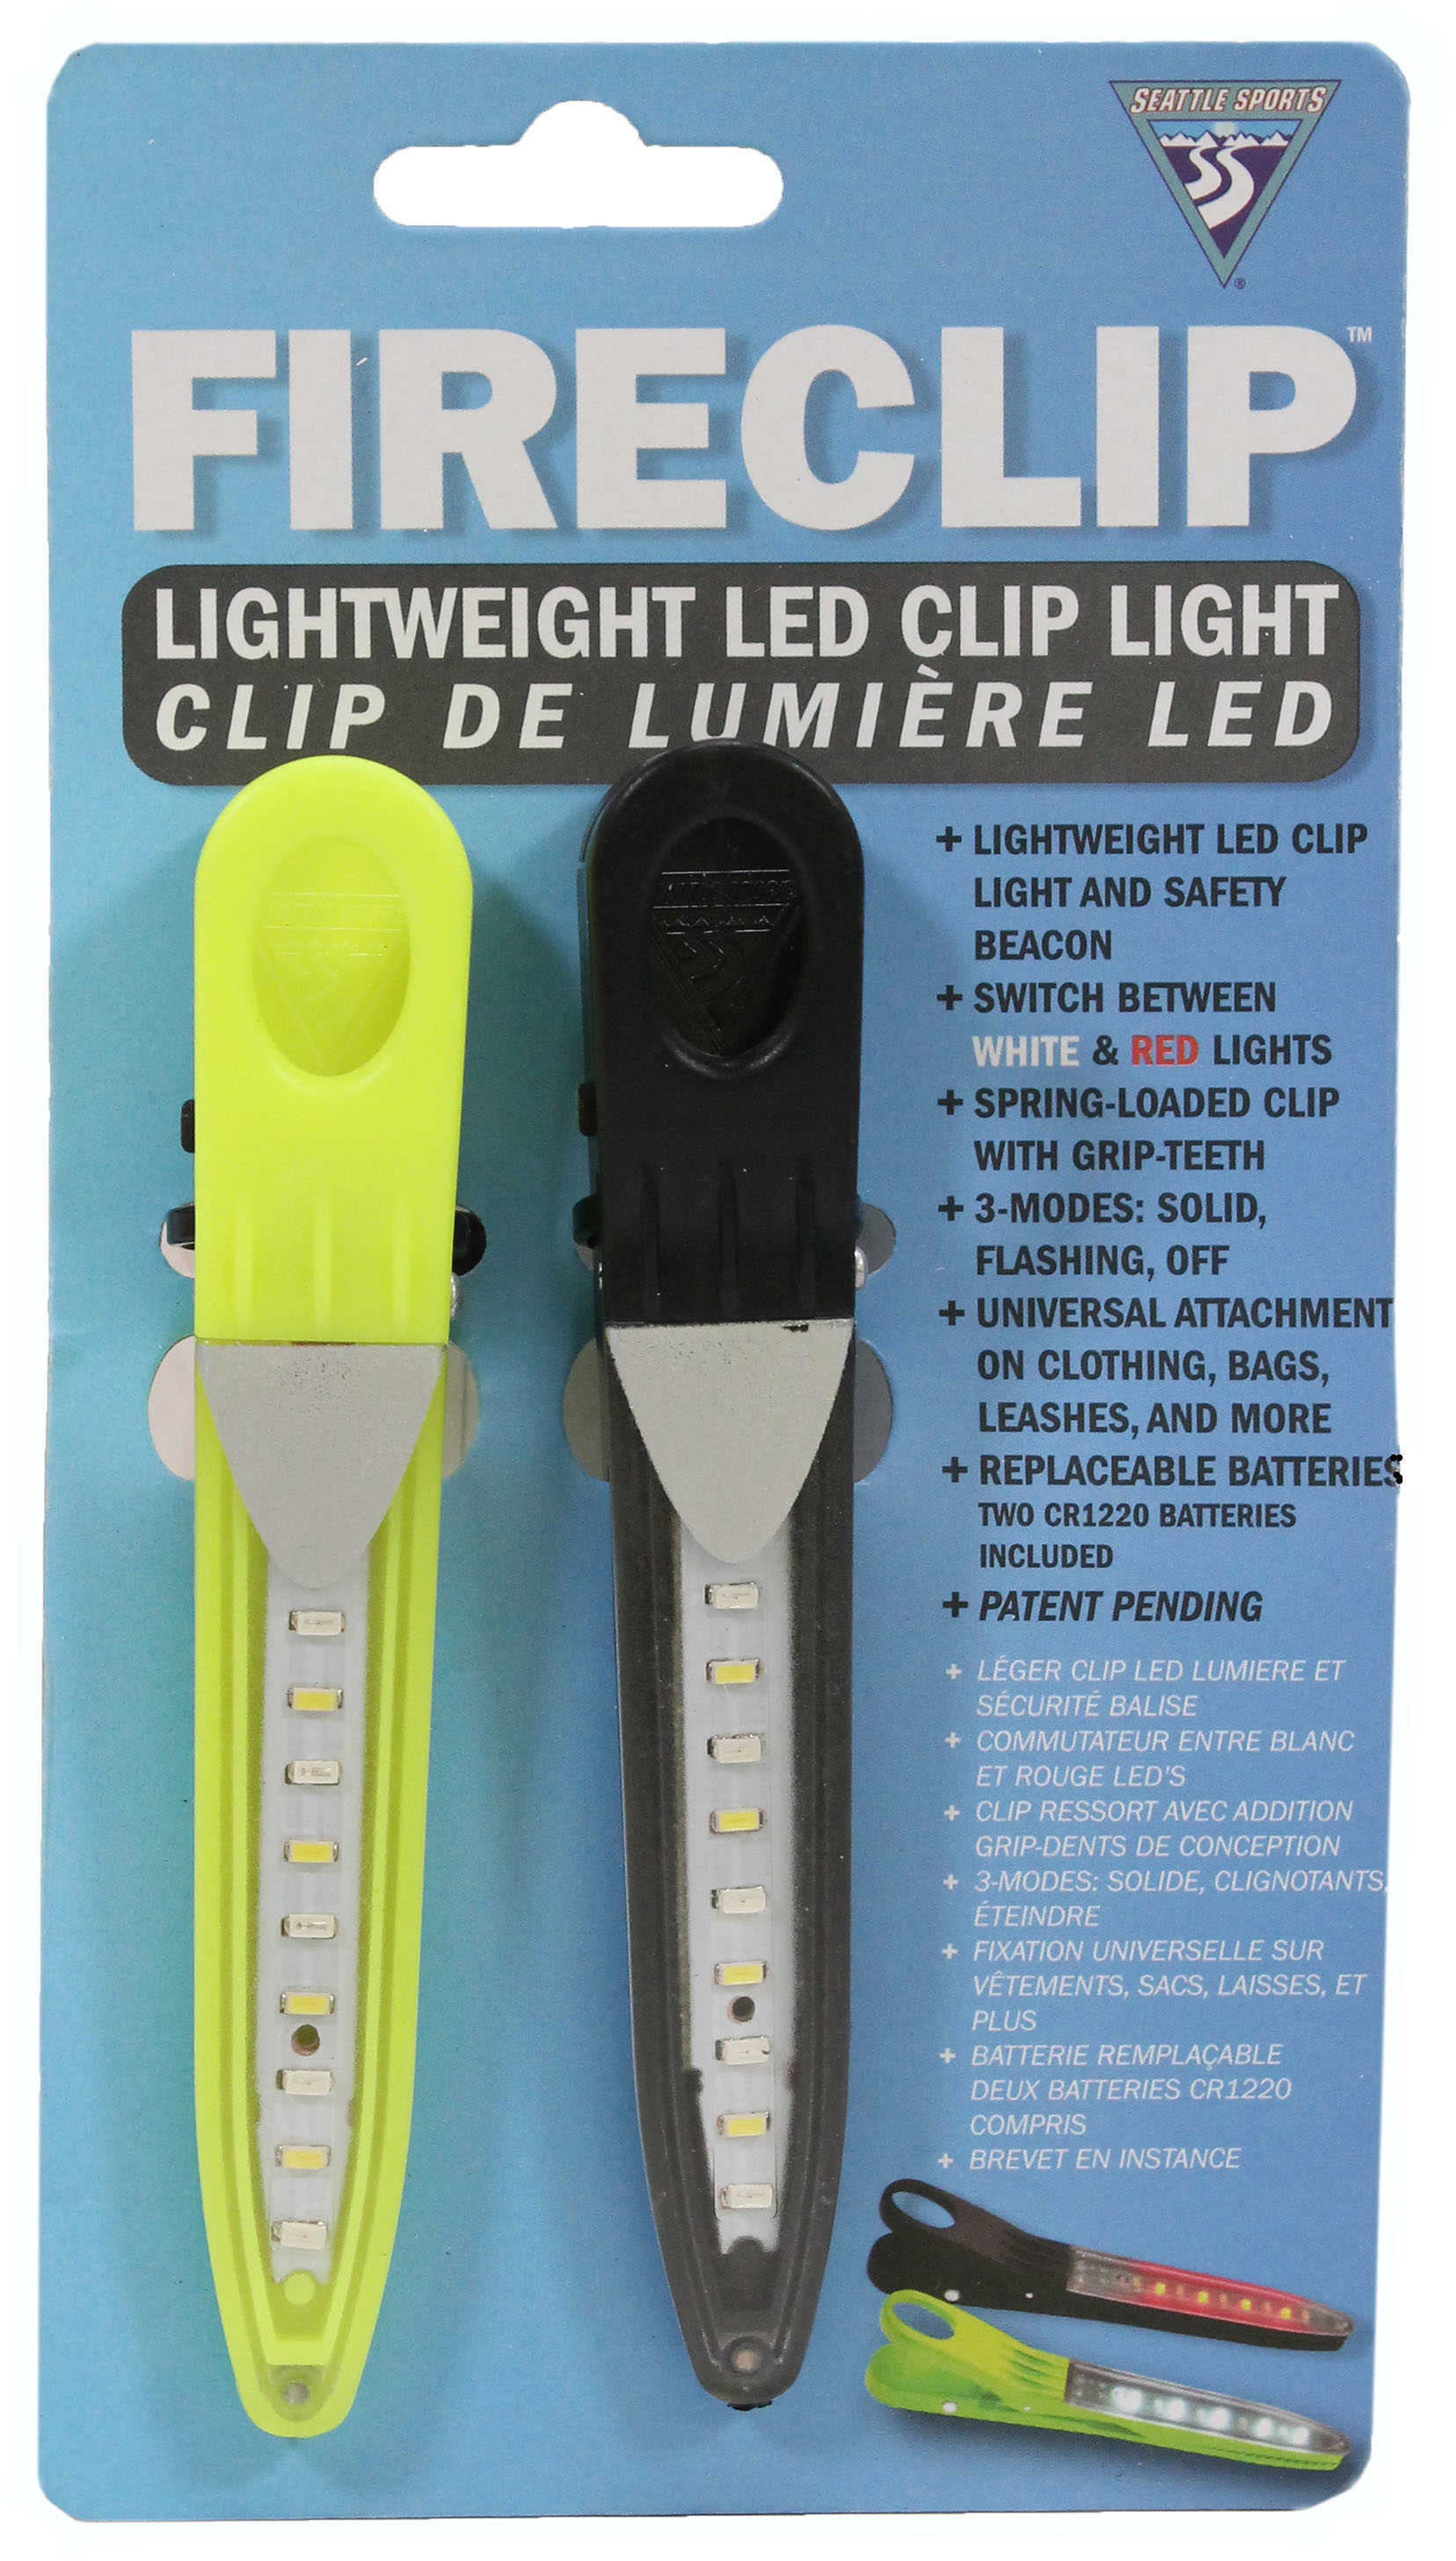 Seattle Sports Fire Clip LED Light, Green/White. 2 Pack Md: 066899